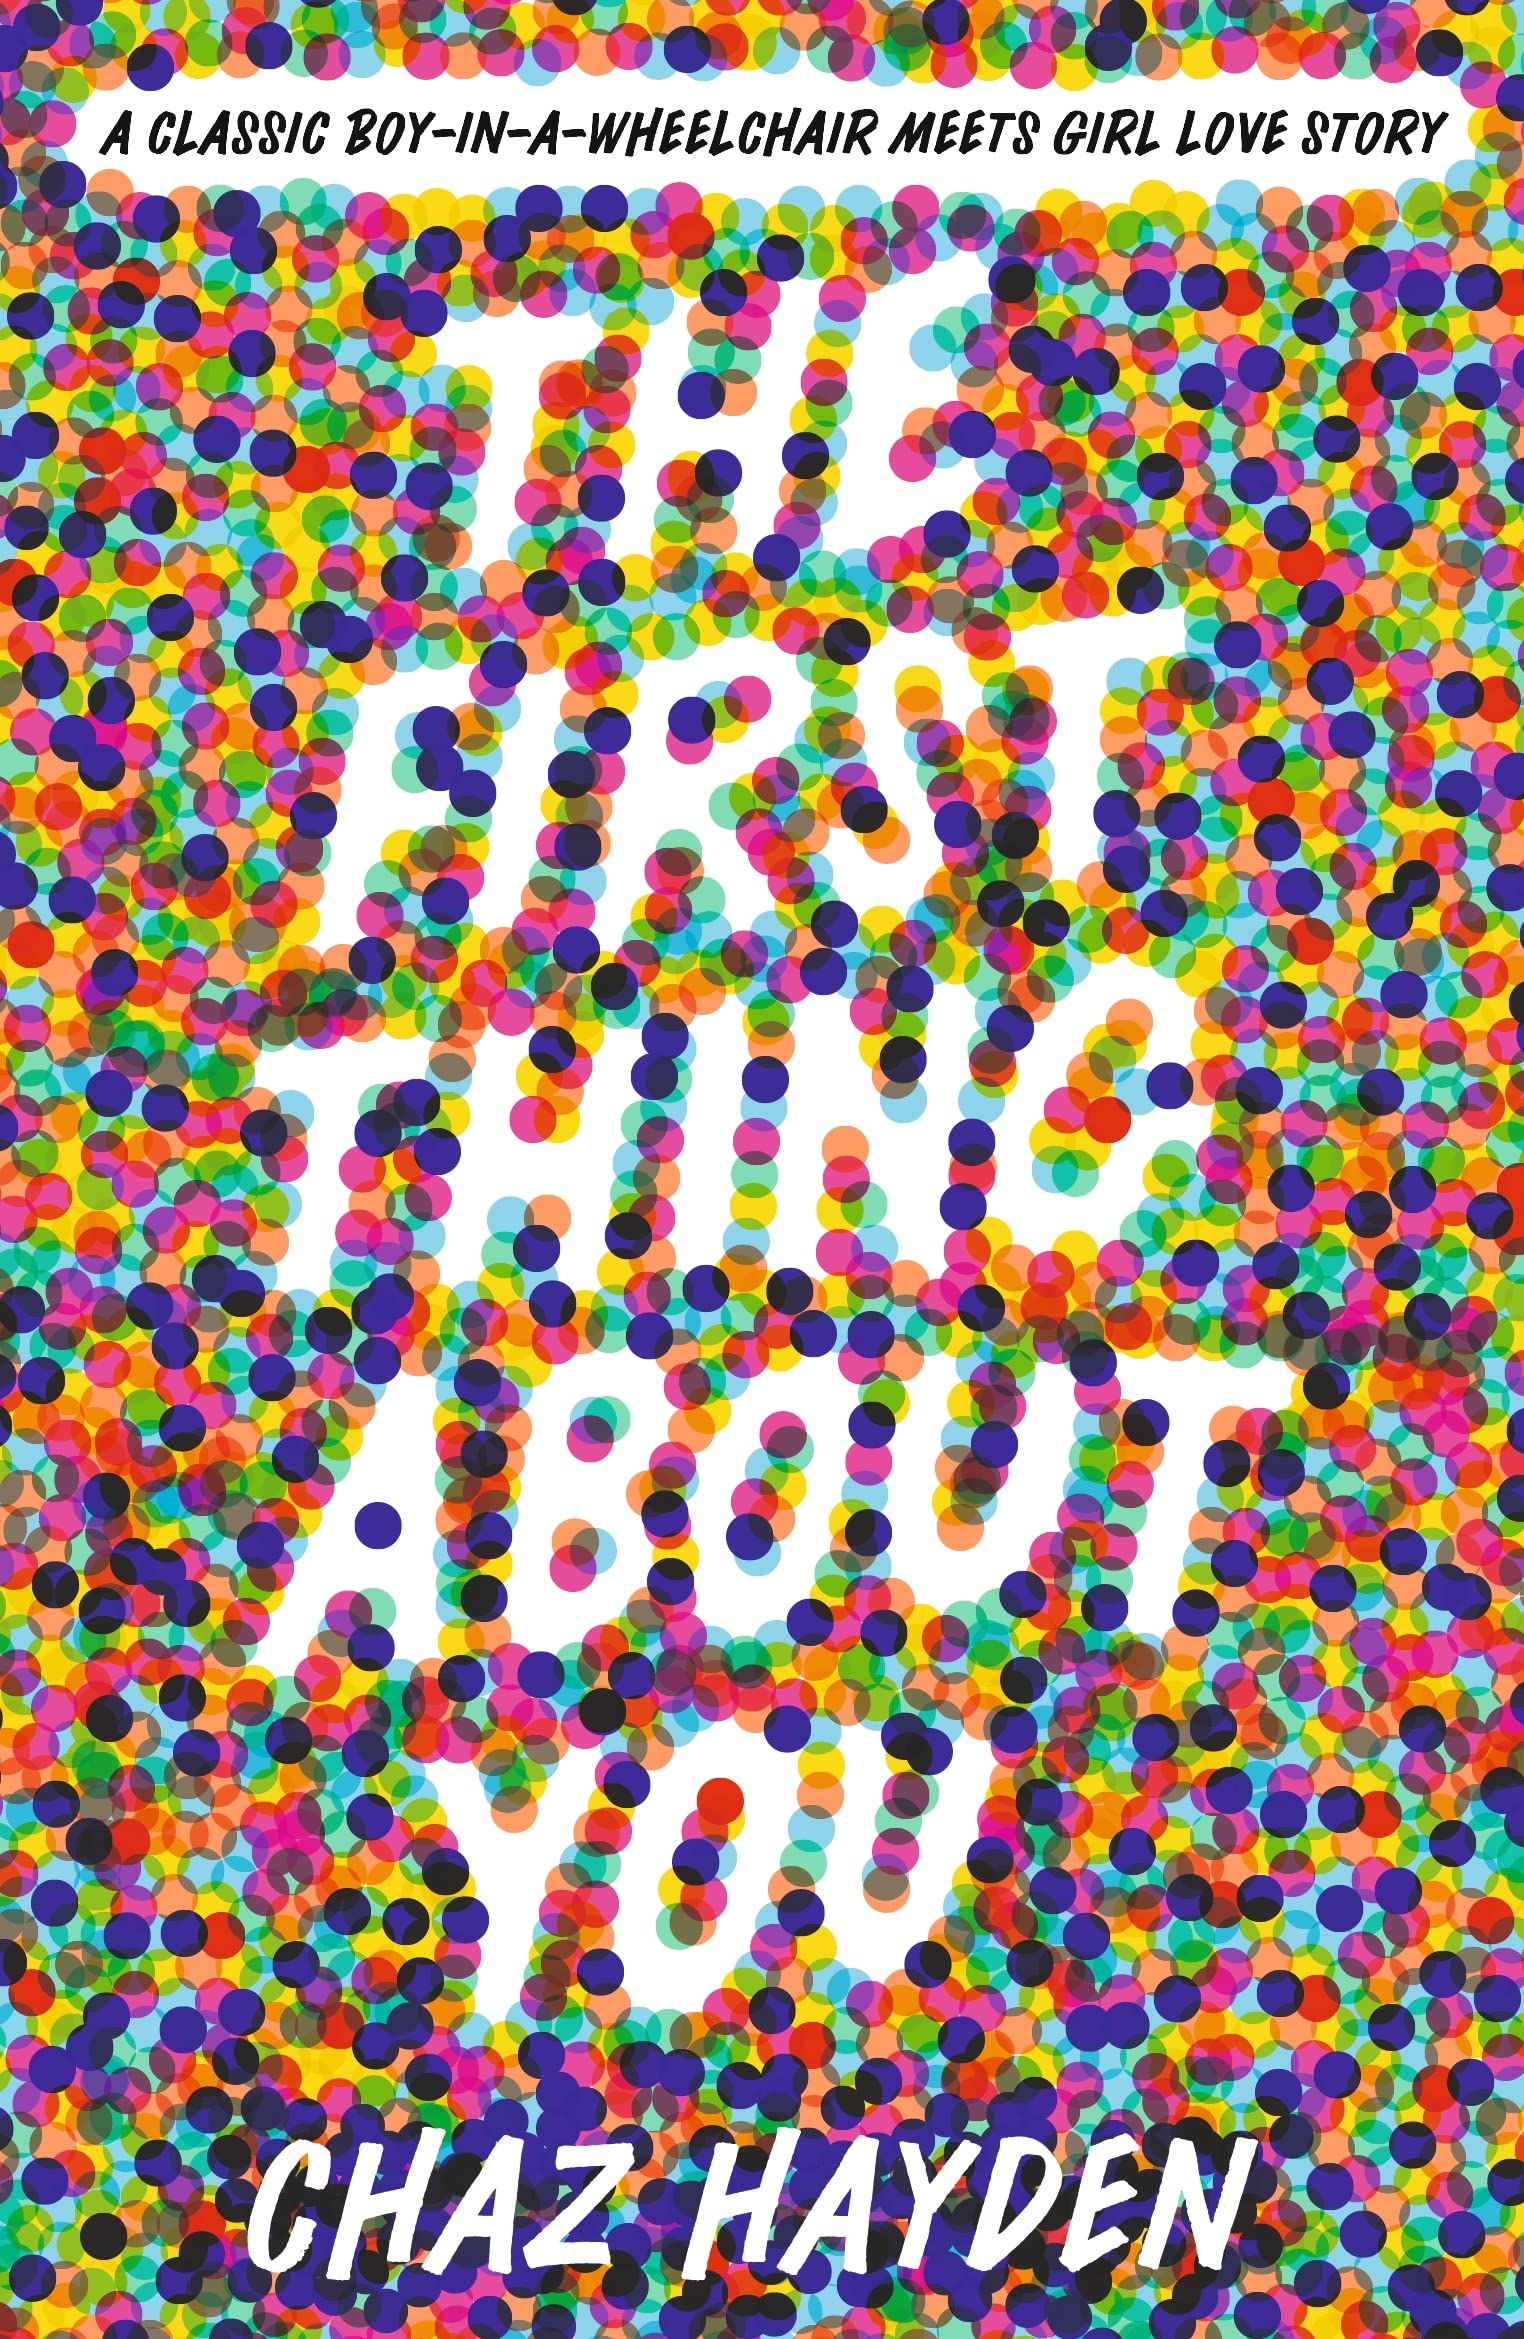 The First Thing About You | Chaz Hayden